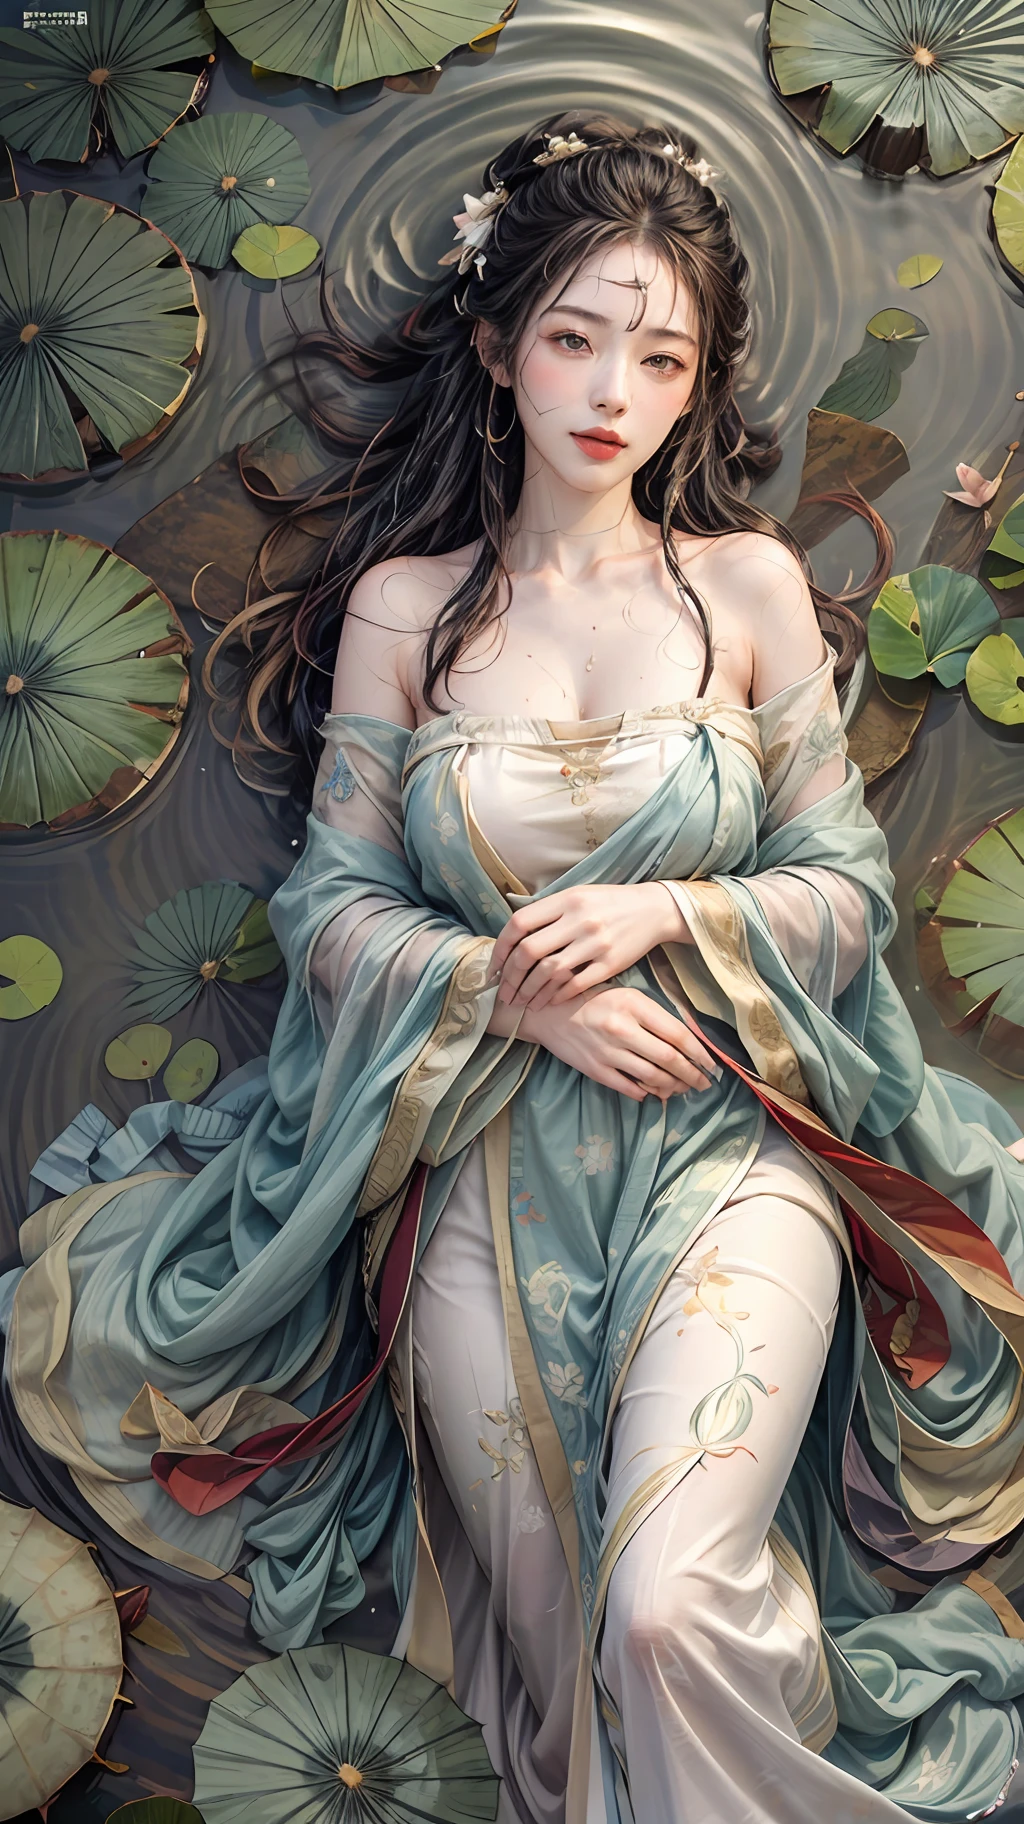 (1girl Lying on the lake:1.5), The body is covered by water,floating hair,floating silk, hanfu is wet by water,clean water, Carp, solo, hanfu, (Huge lotus leaf:1.3), (lotus:1.1), dynamic posture,see through cloth, chinese,long_hair,misty, light smile,shy,Elegant,(lake water:1.2),sahdow,reflection, Top view angle, Depth of field, official art, ultra detailed, aesthetic,masterpiece,best quality, ancient art,